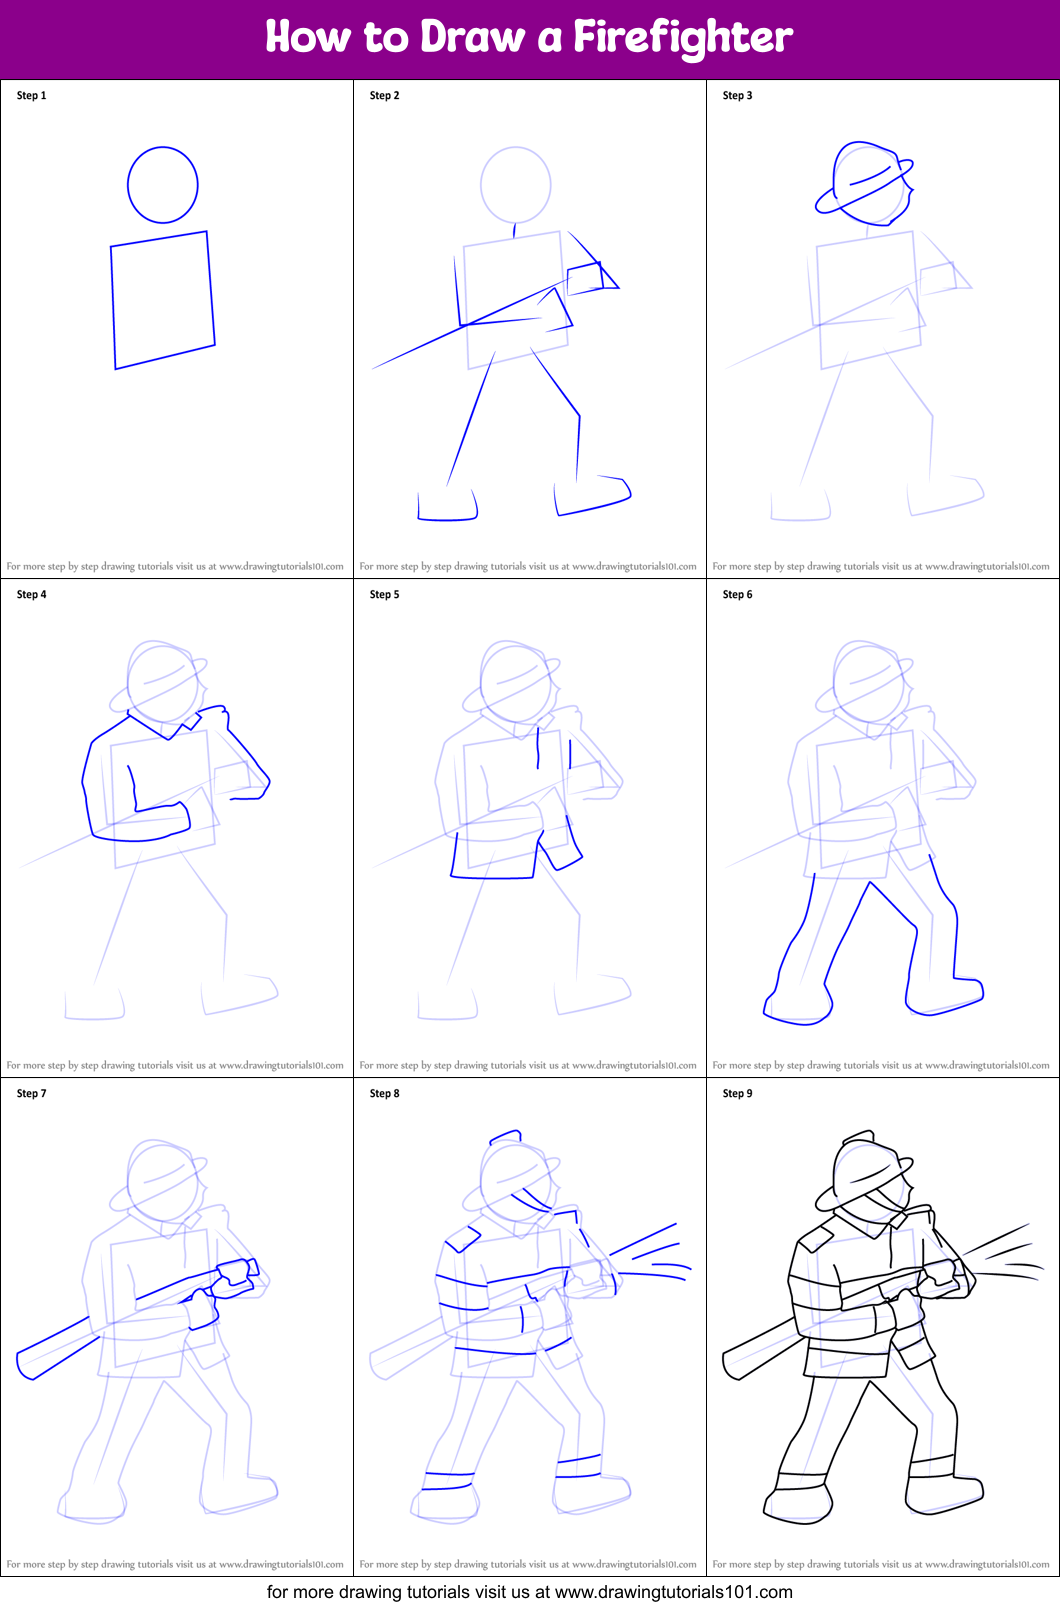 How to Draw a Firefighter (Other Occupations) Step by Step